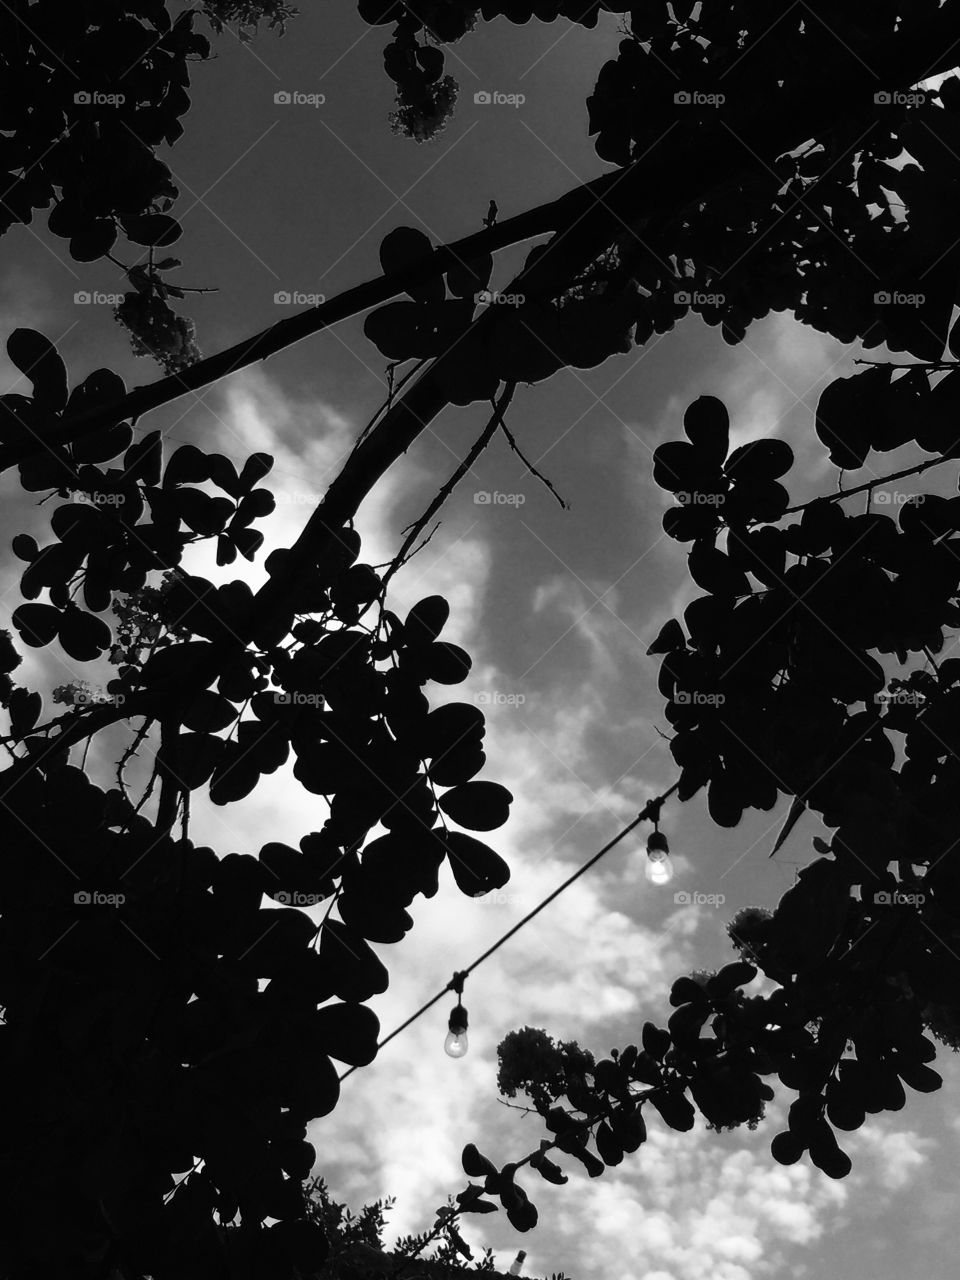 Out shot looking up through trees at sky black and white evening 